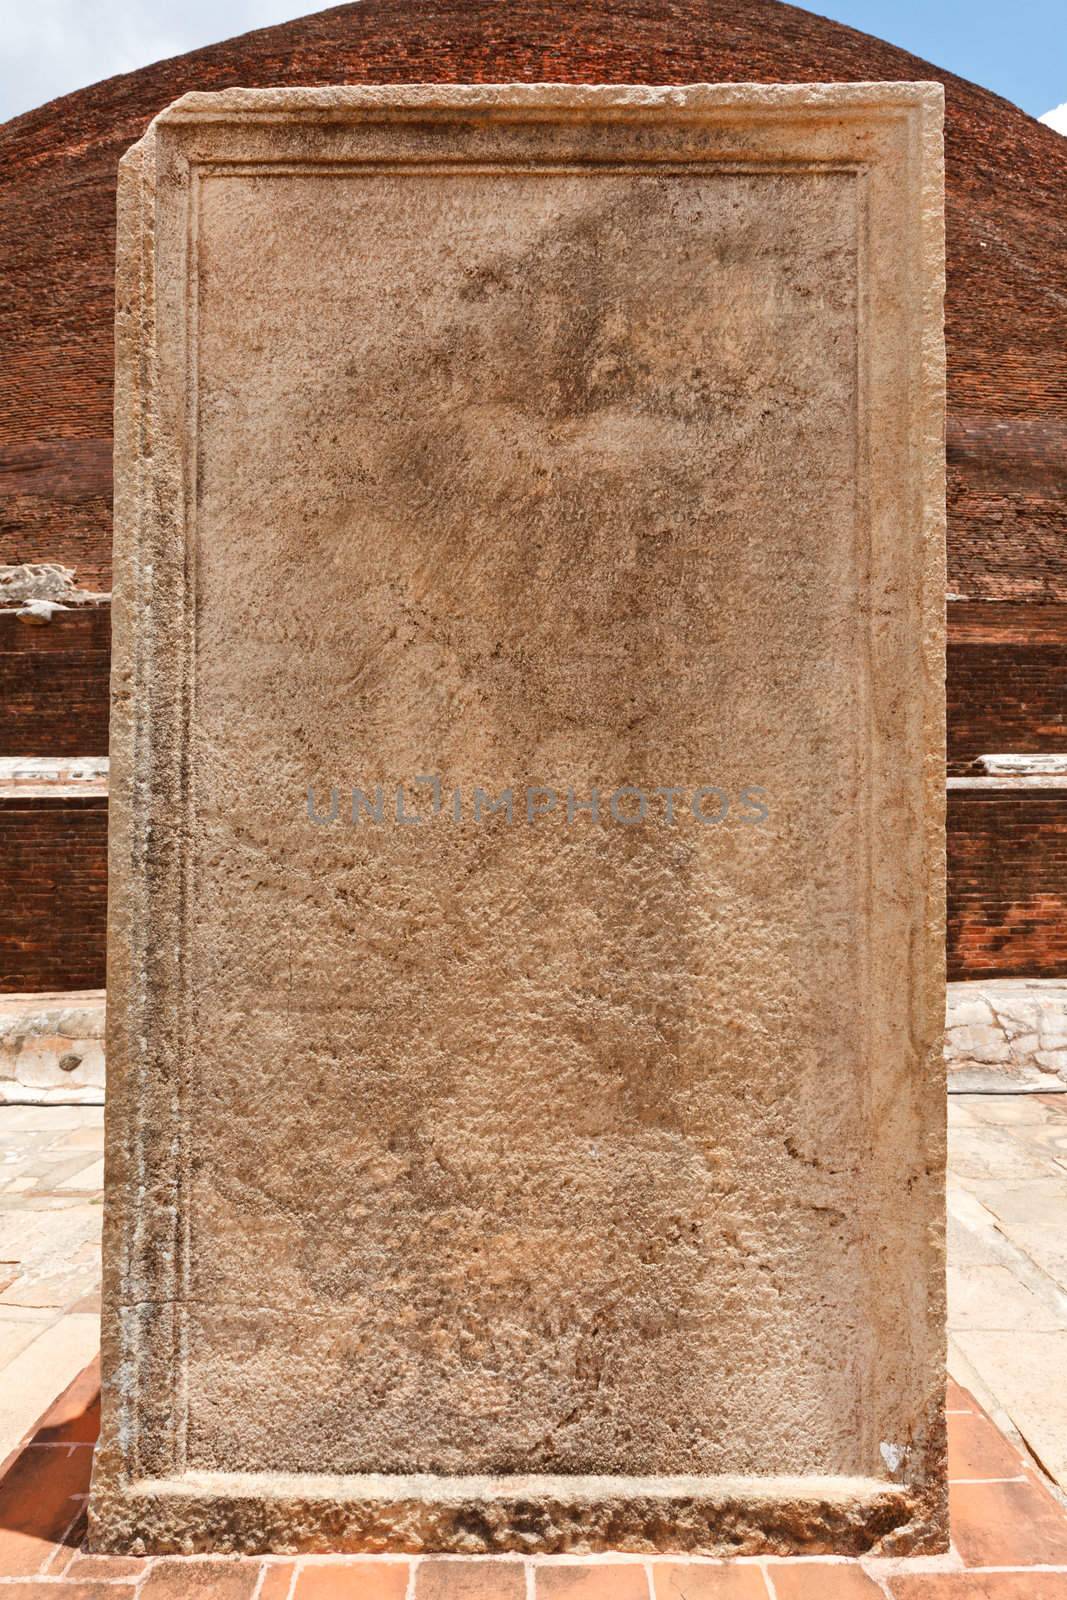 Stone tablet with inscriptions by dimol